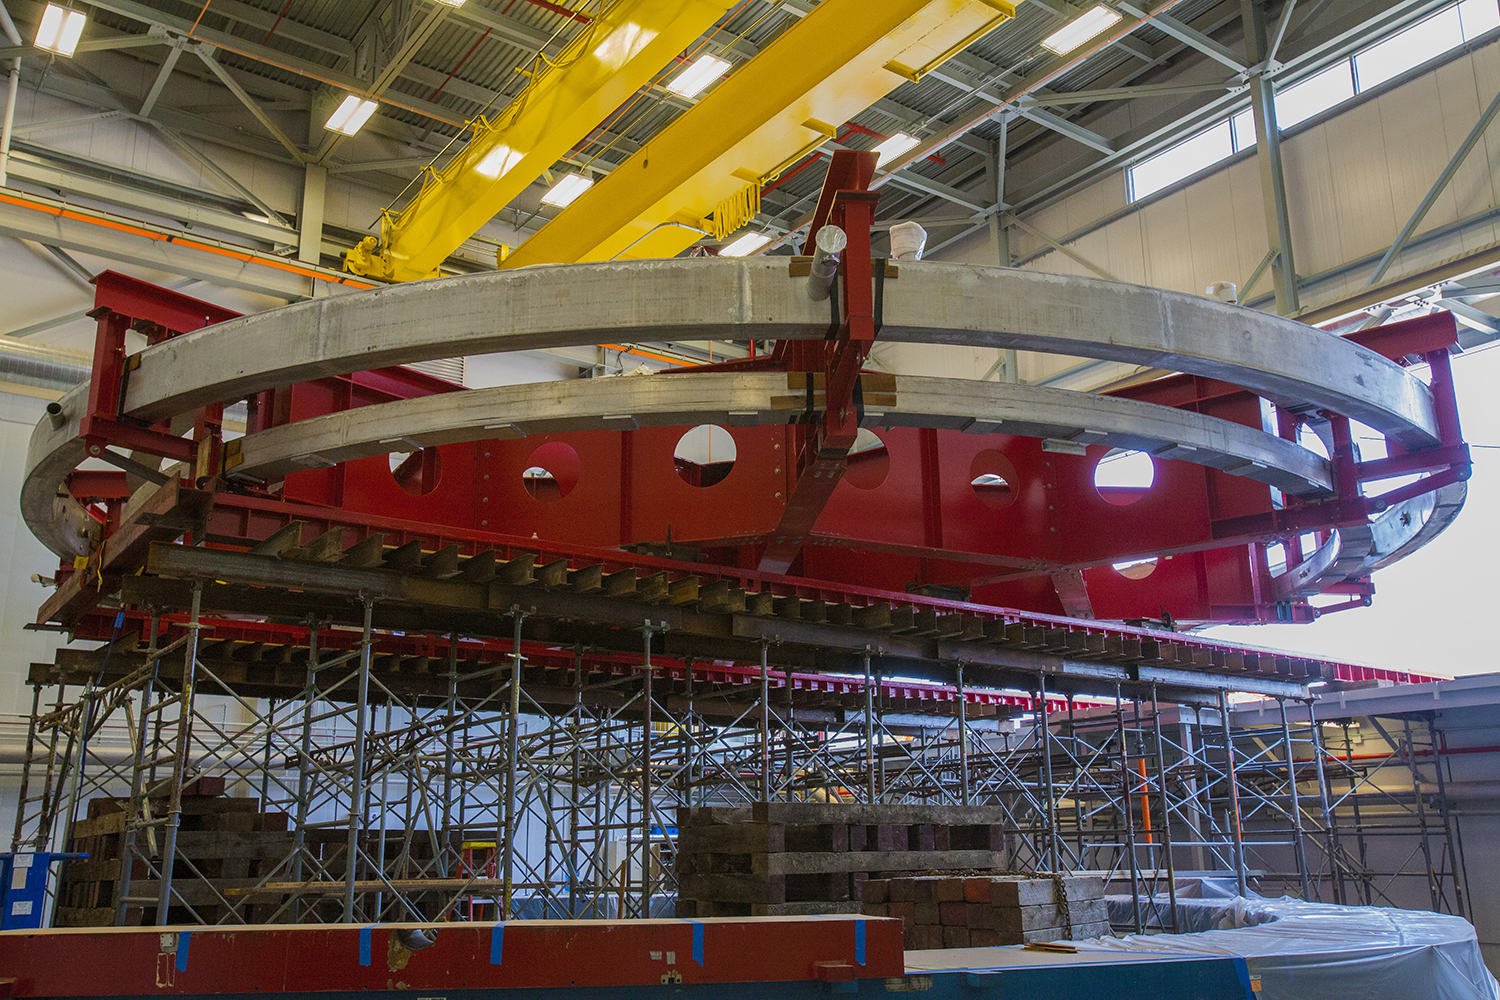 The 50-foot-wide Muon g-2 electromagnet at rest inside the Fermilab building that will house the experiment. The magnet was moved into the new building on Wednesday, July 30, 2014. The magnet will allow scientists to precisely probe the properties of subatomic particles called muons. Photo: Fermilab.